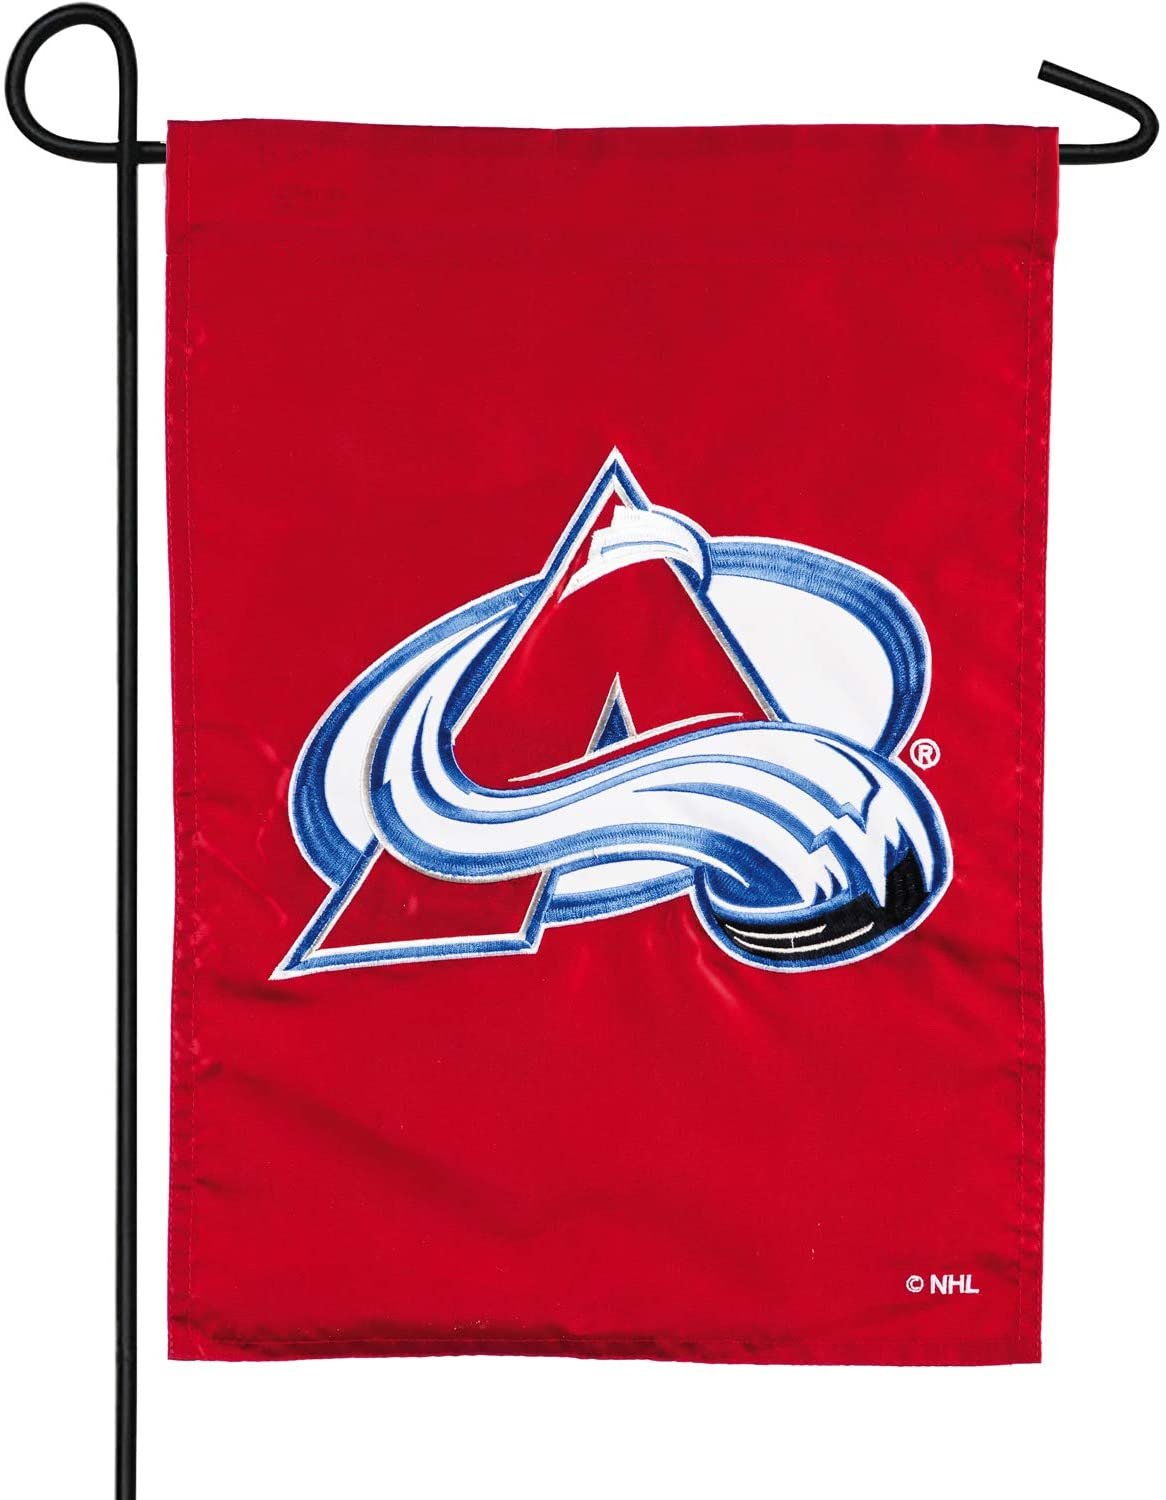 Colorado Avalanche Premium Garden Flag Banner, Double Sided, Emroidered, 13x18 Inch